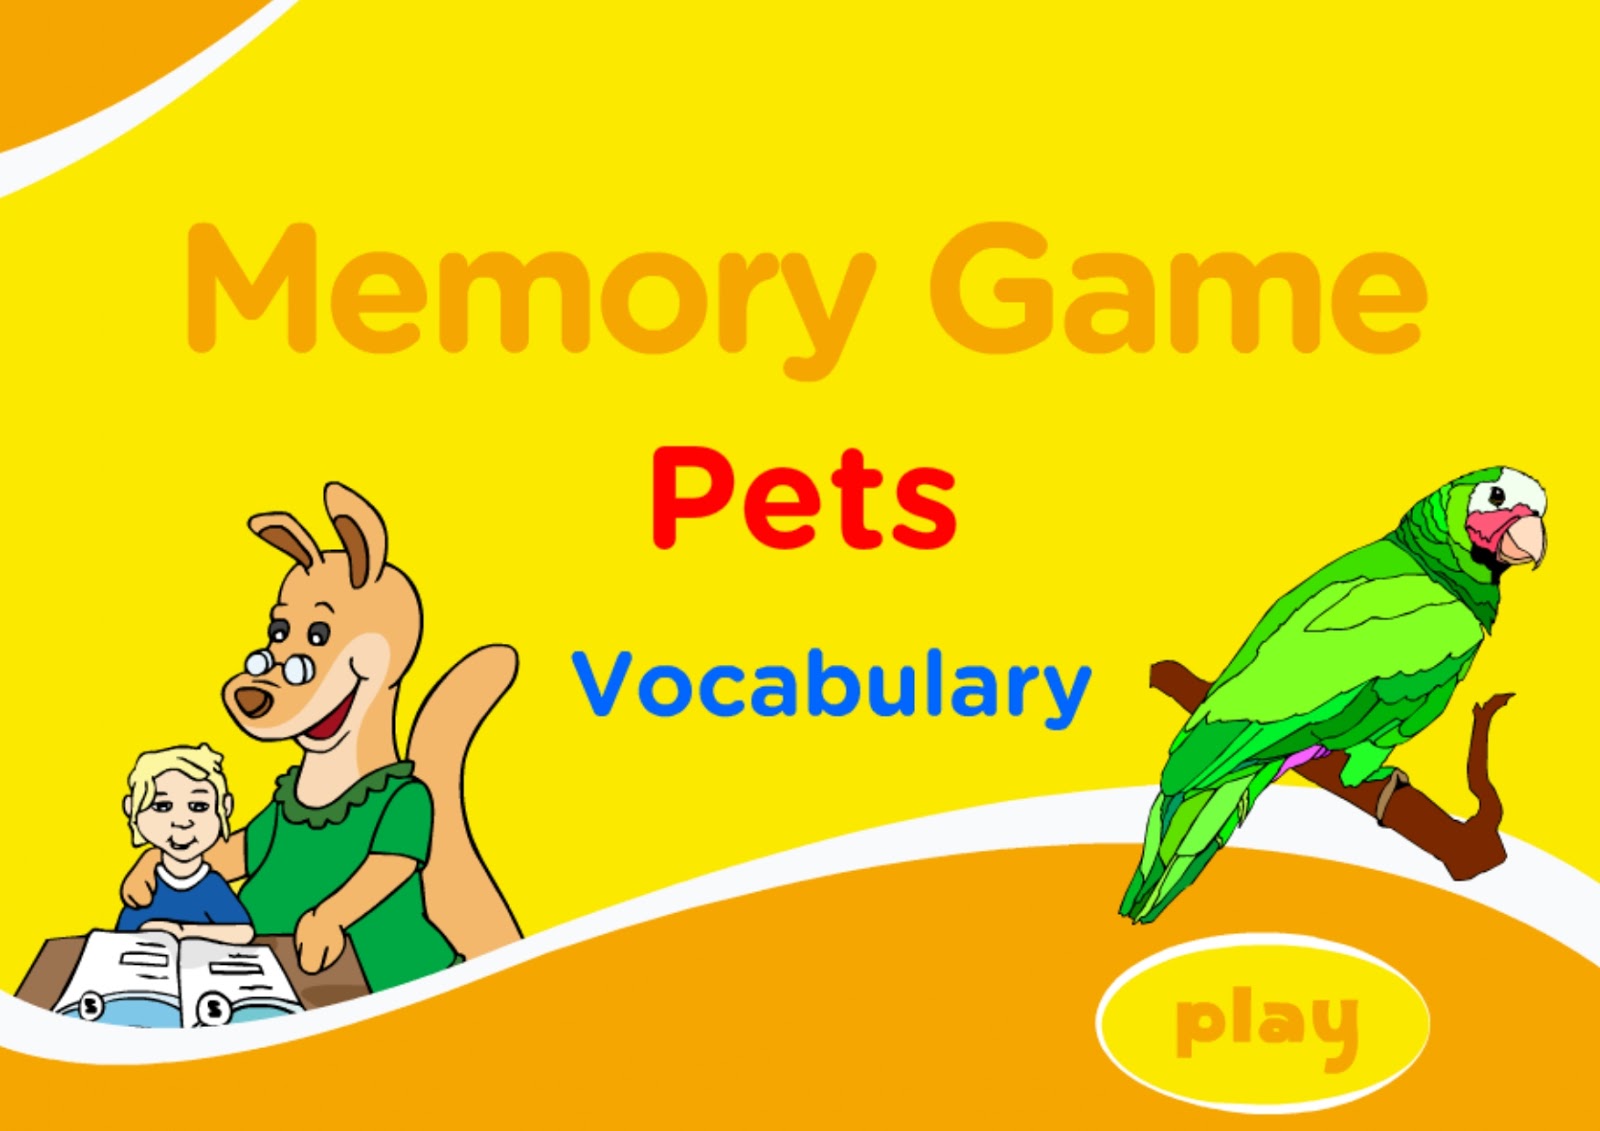 Pets vocabulary. Memory game Pets. Learn Pets. Mems of Pets.